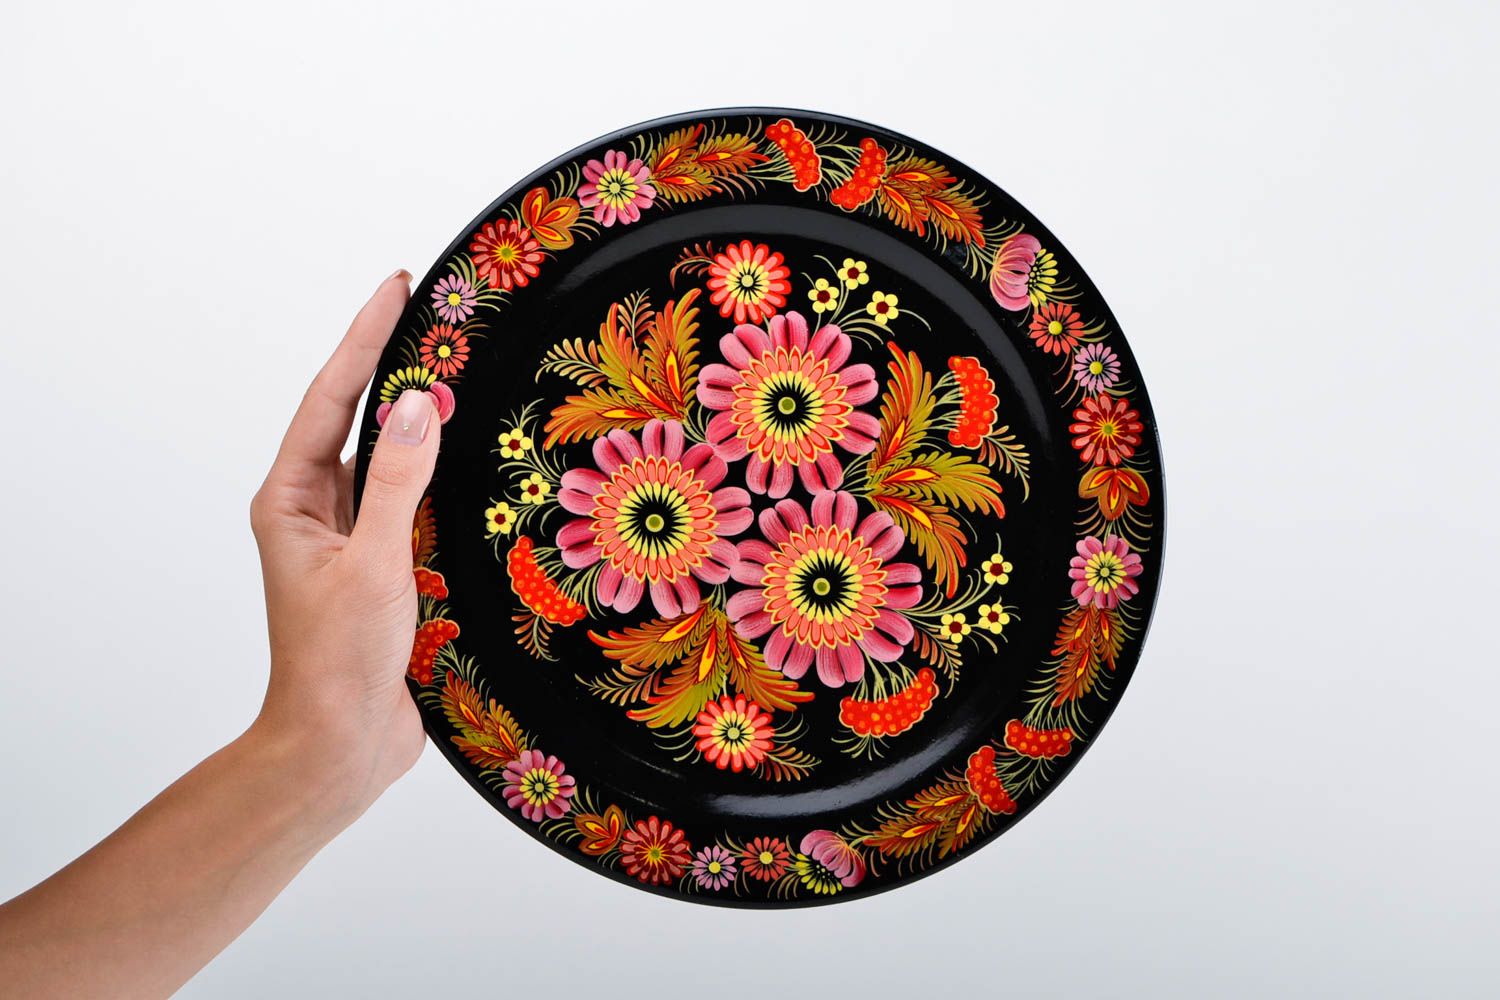 Handmade wood plate painted plate for decorative use only souvenir ideas photo 2